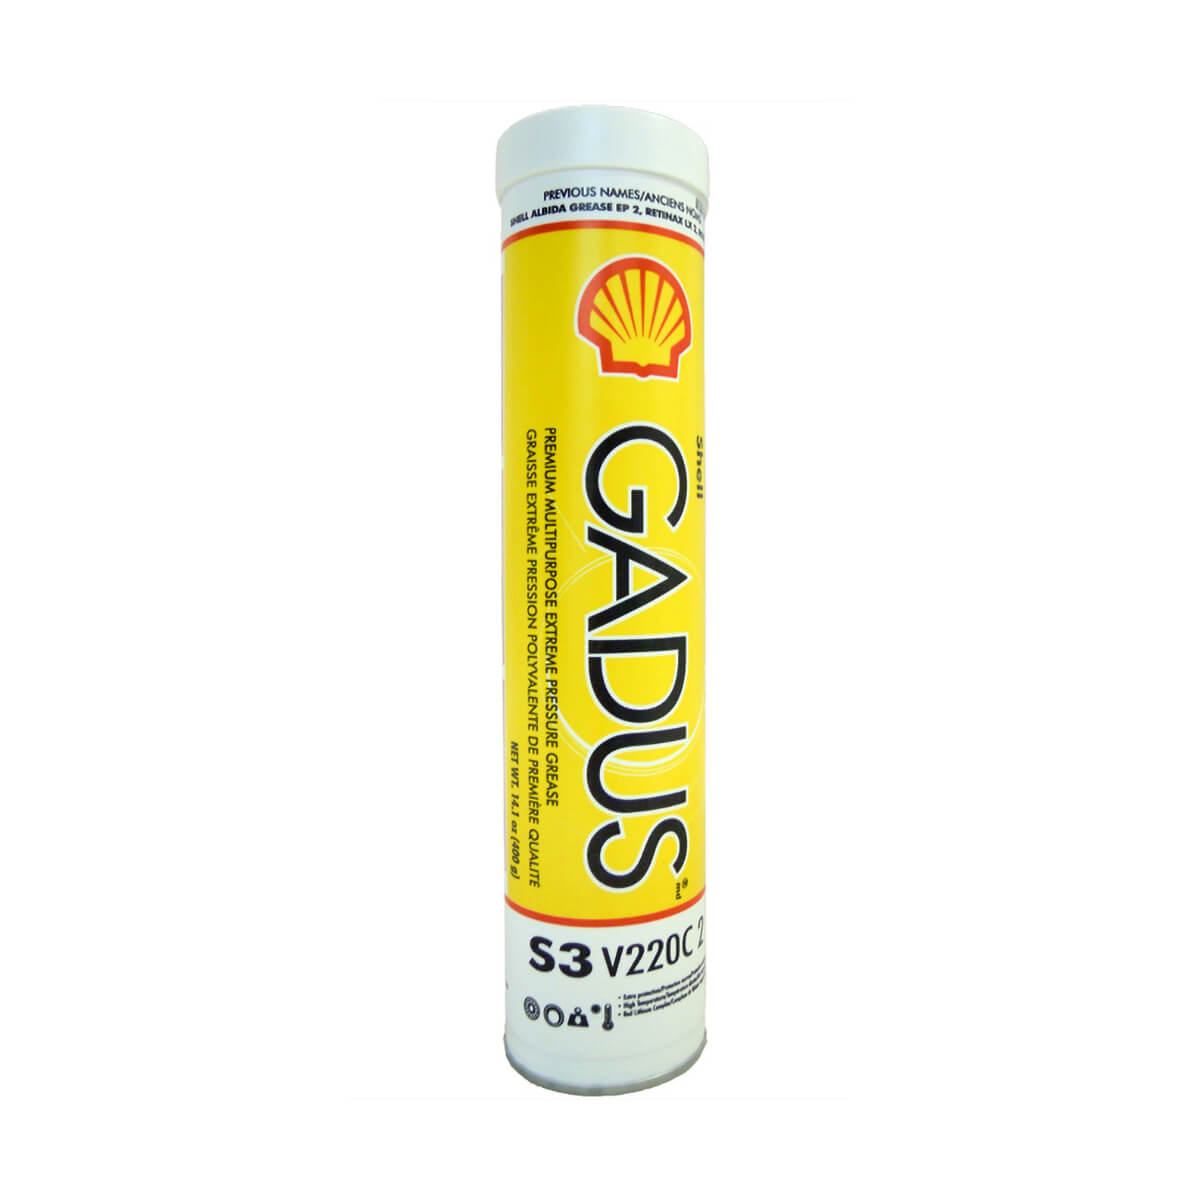 Shell Gadus Grease S3 V220C 2 - 400 g